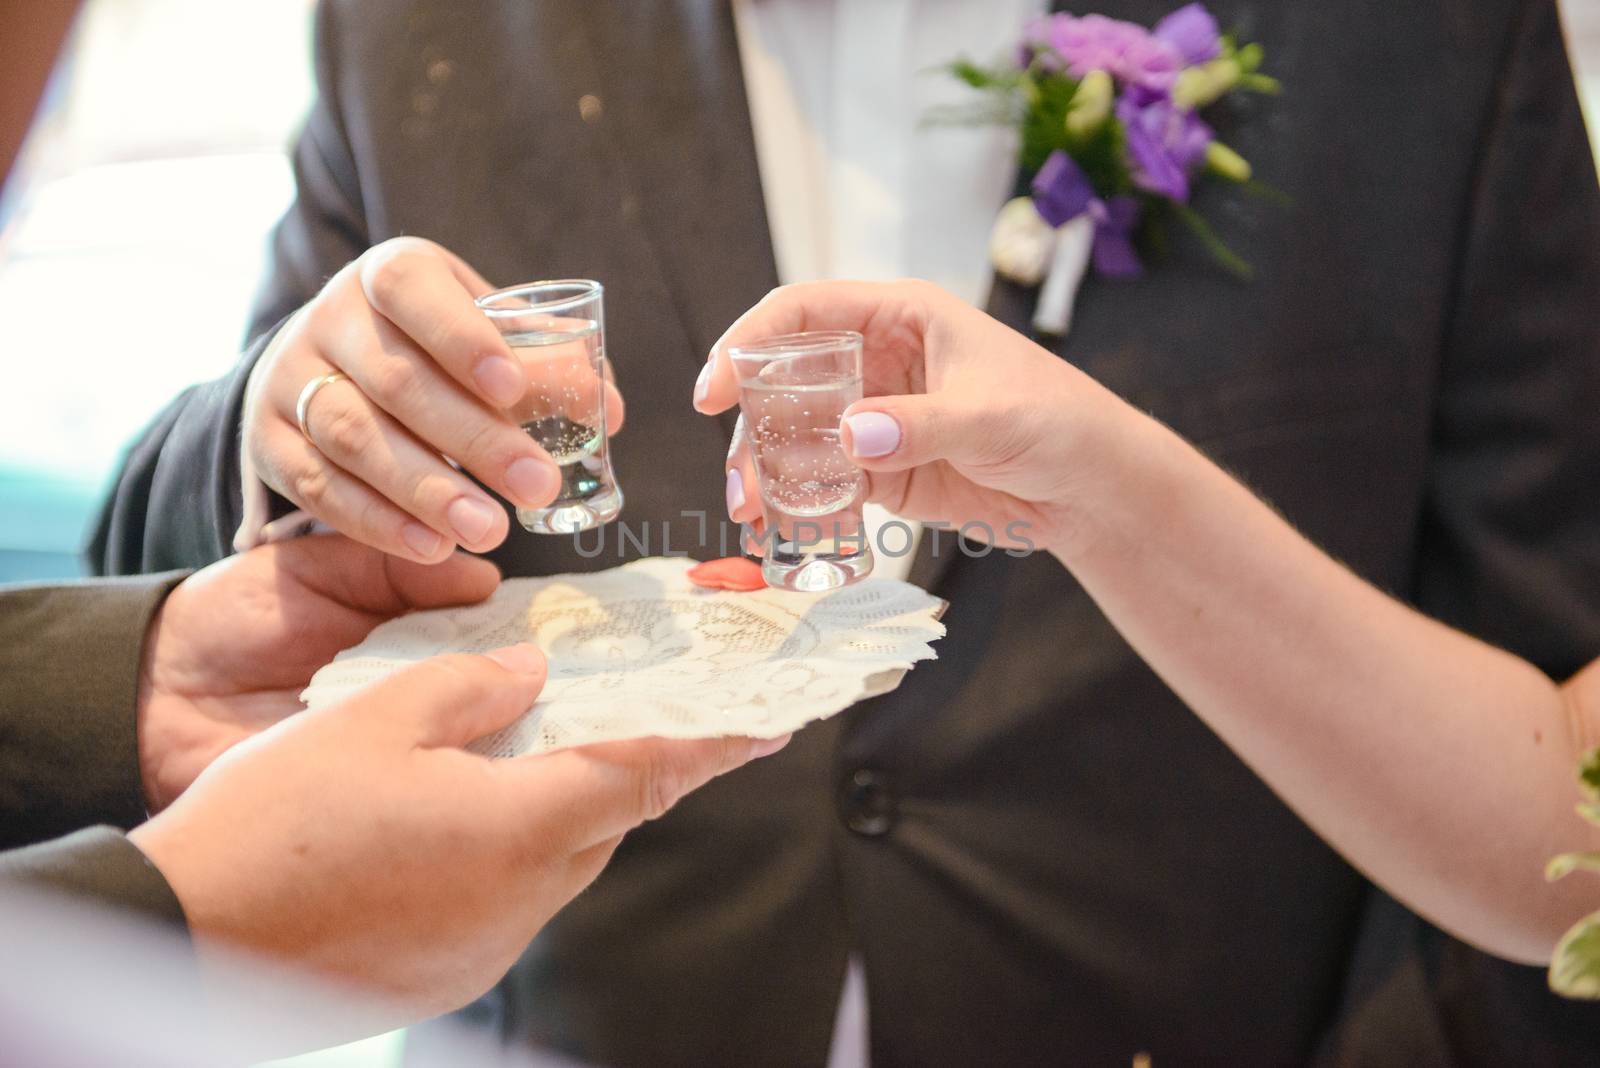 Traditional polish greeting the bride and groom by the parents with bread and salt. Vodka also in glasses.